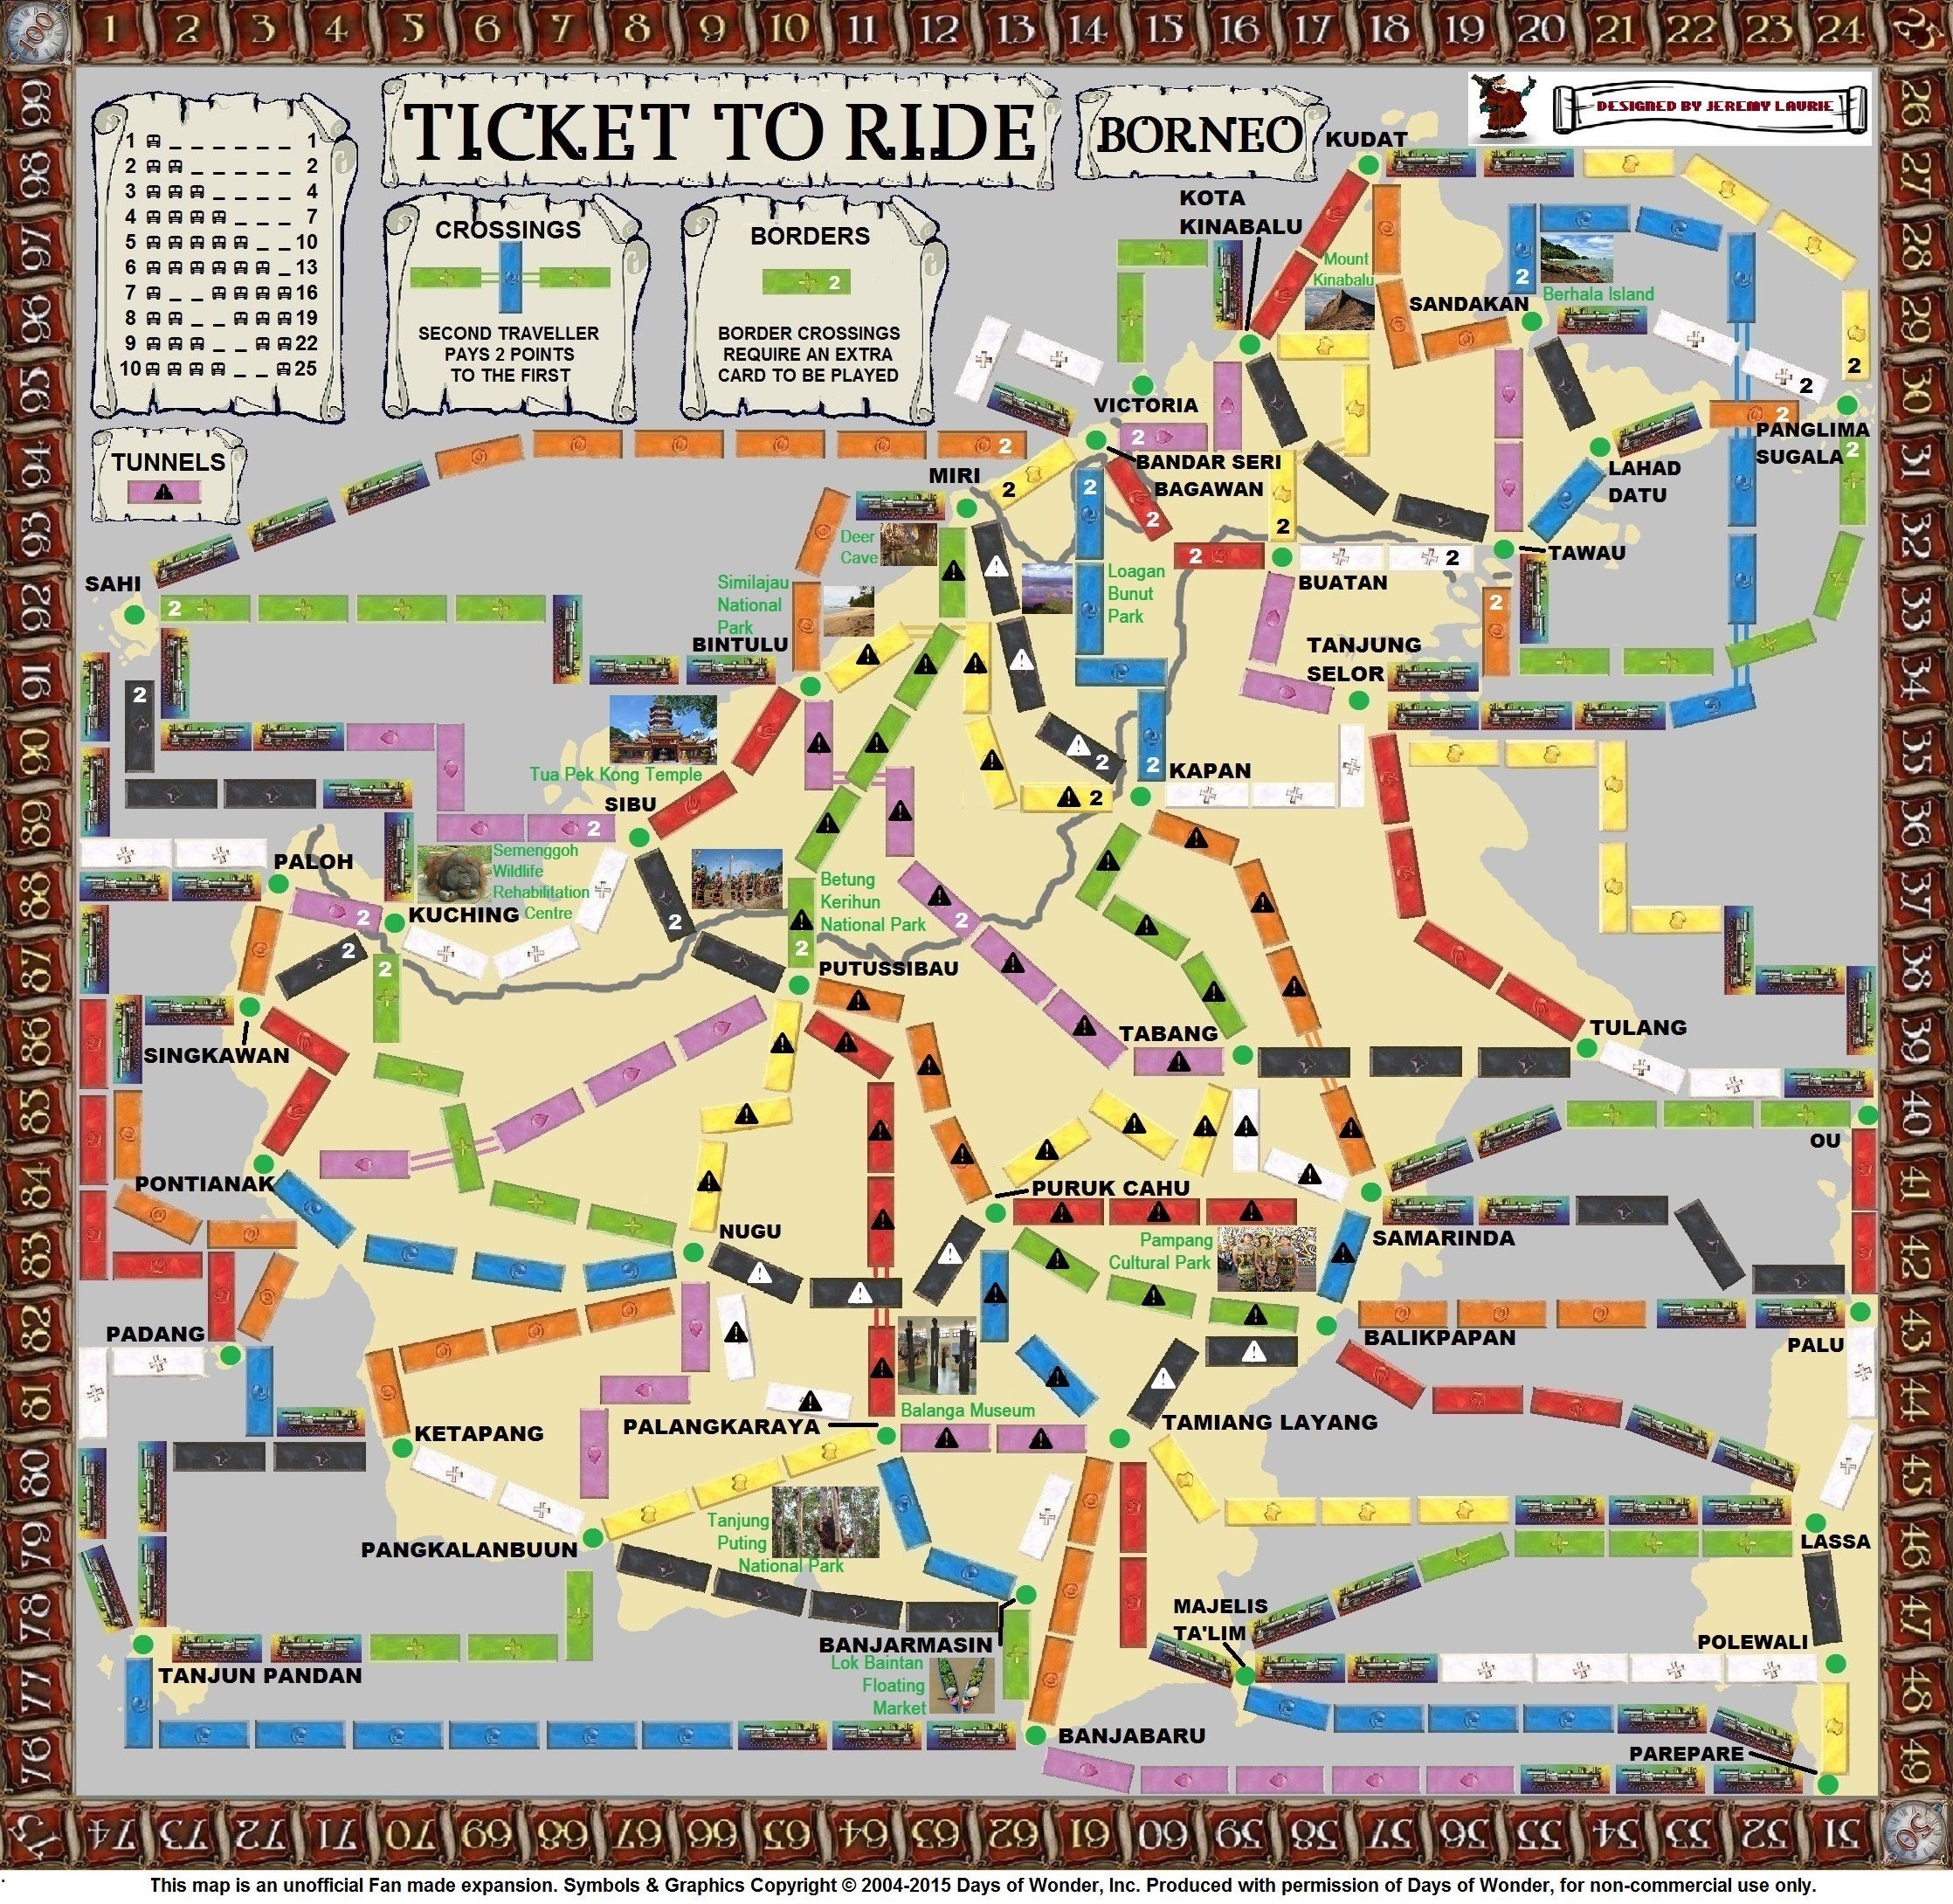 Borneo (fan expansion for Ticket to Ride)